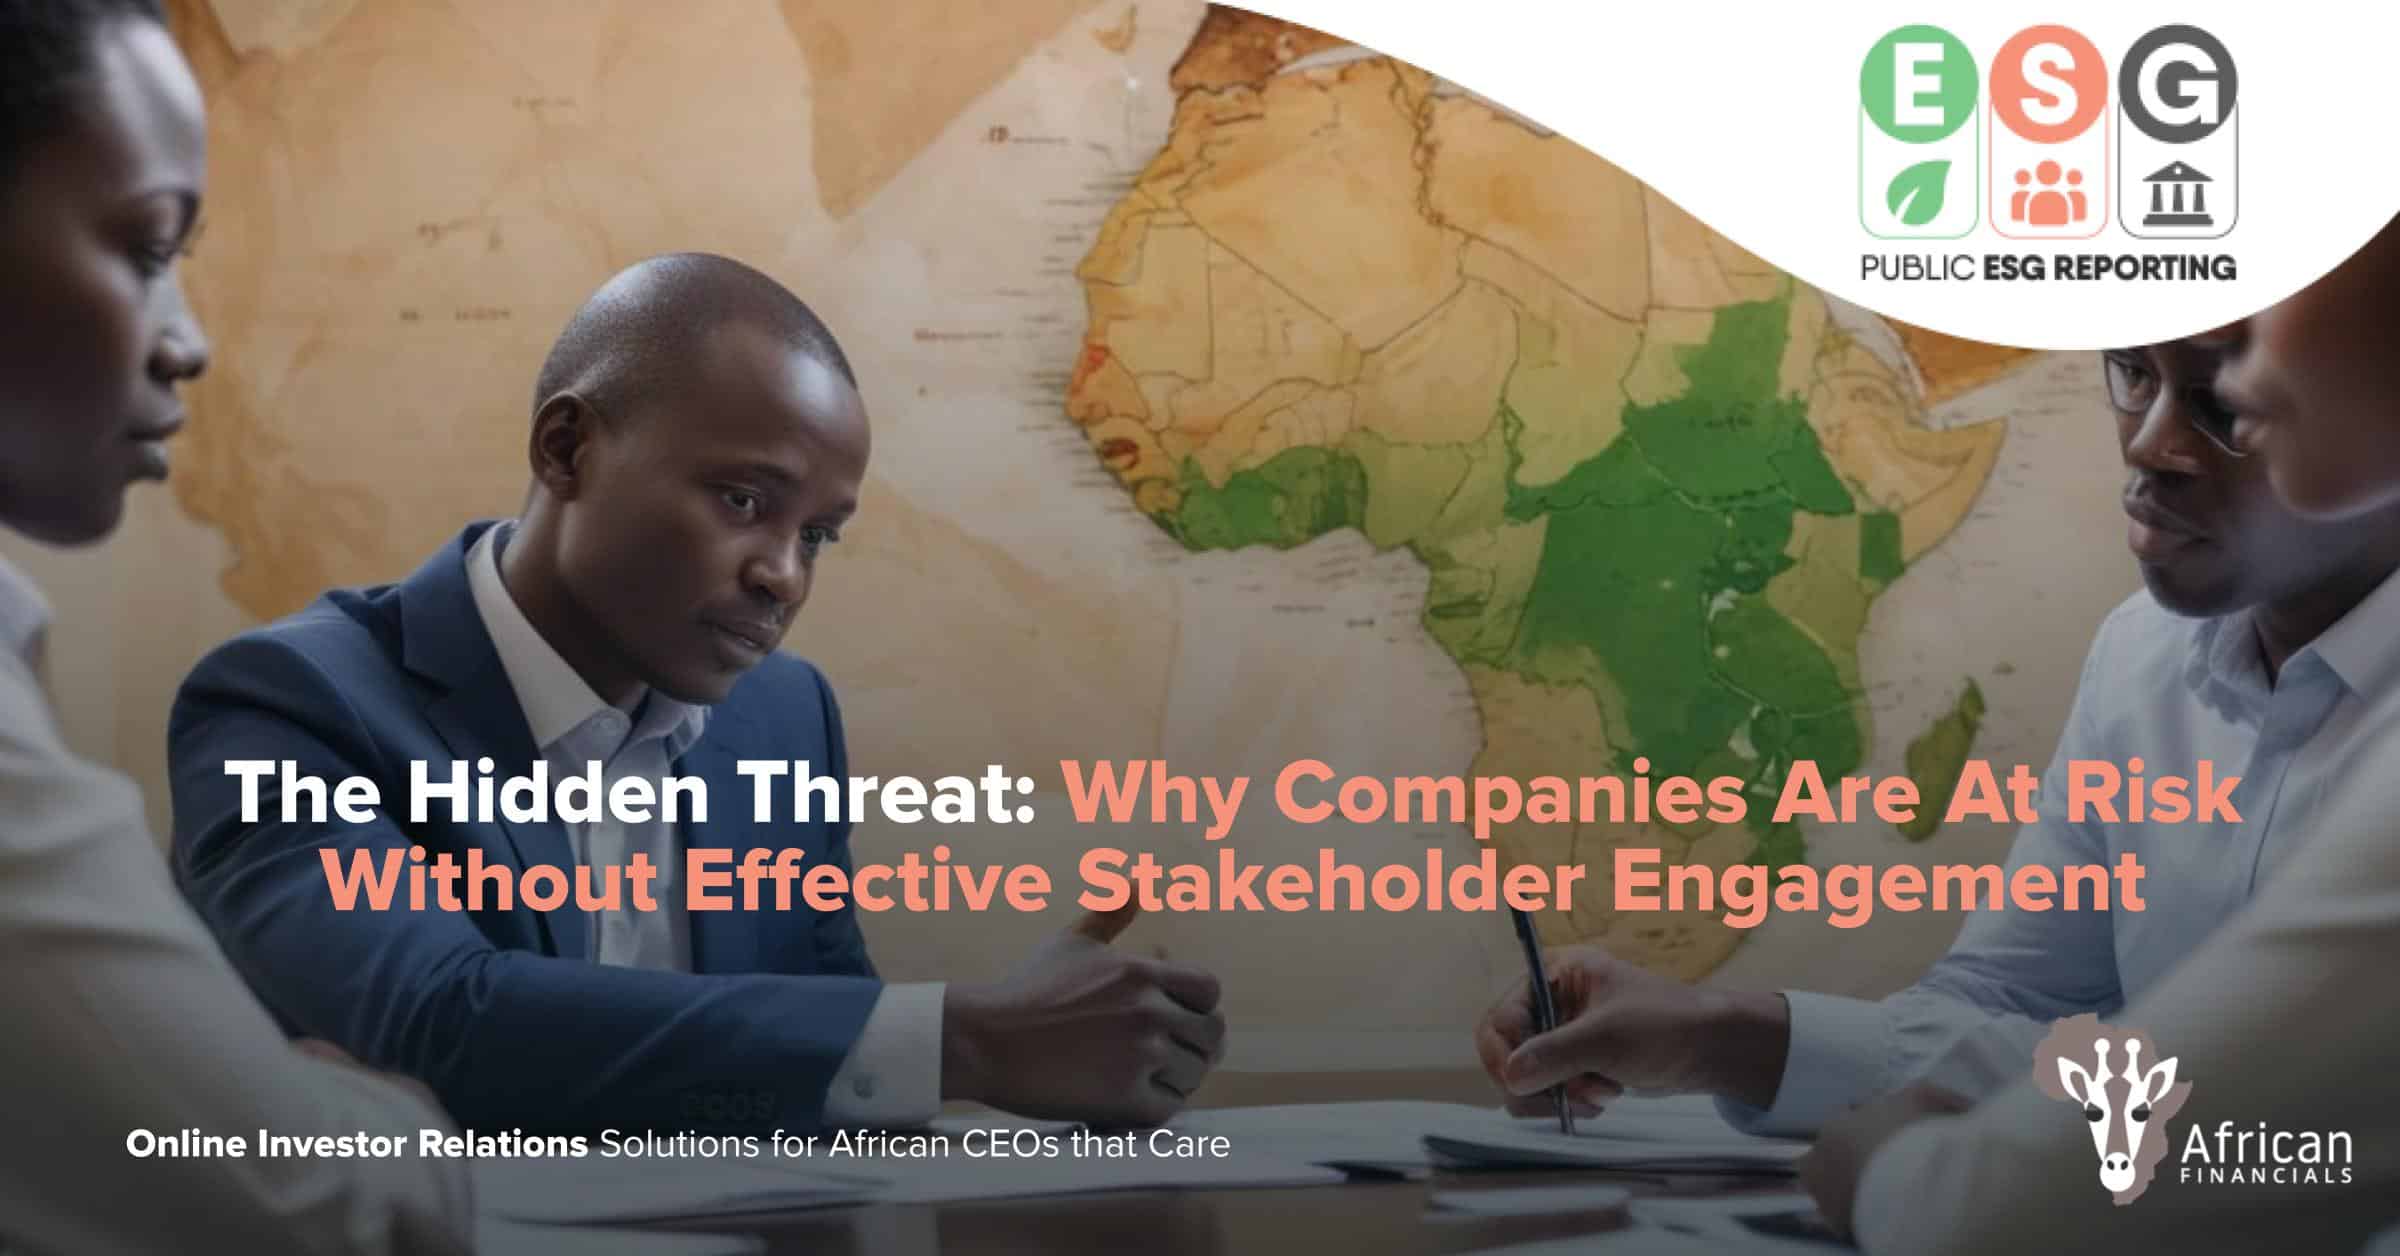 The Hidden Threat: Why Companies Are At Risk Without Effective Stakeholder Engagement